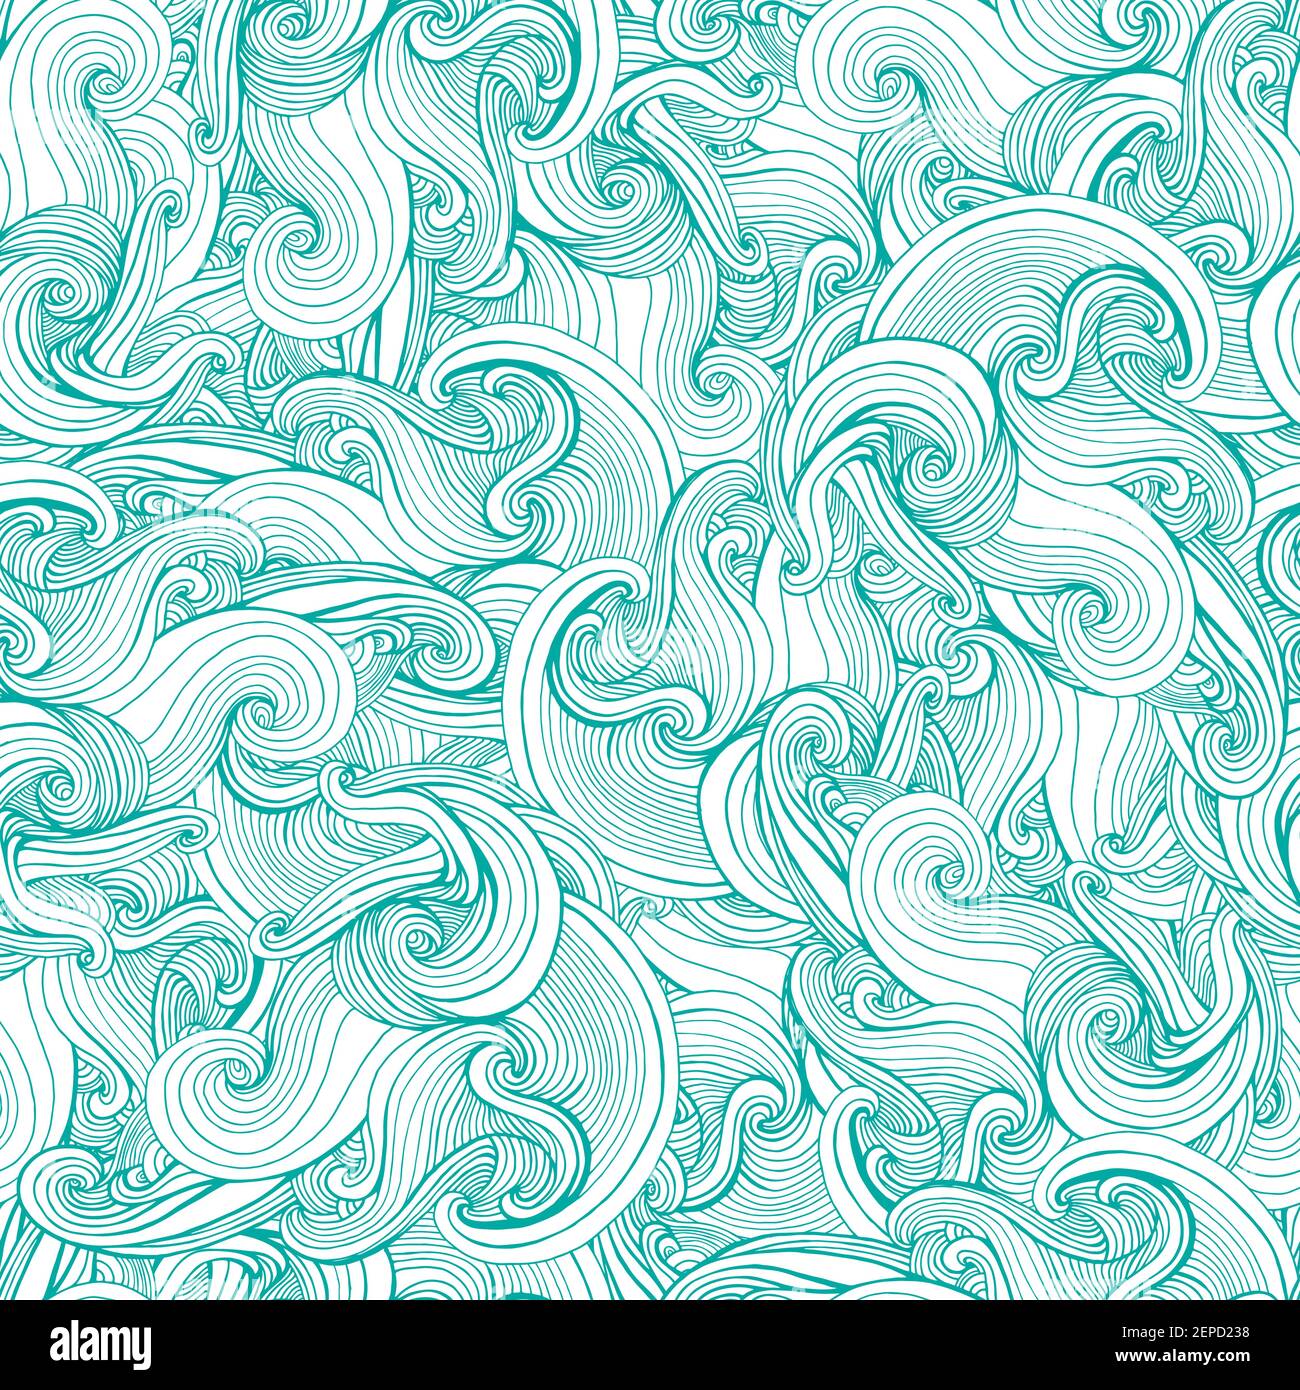 Waves colorful abstract seamless pattern, turquoise outline and white ornament. Stock Vector